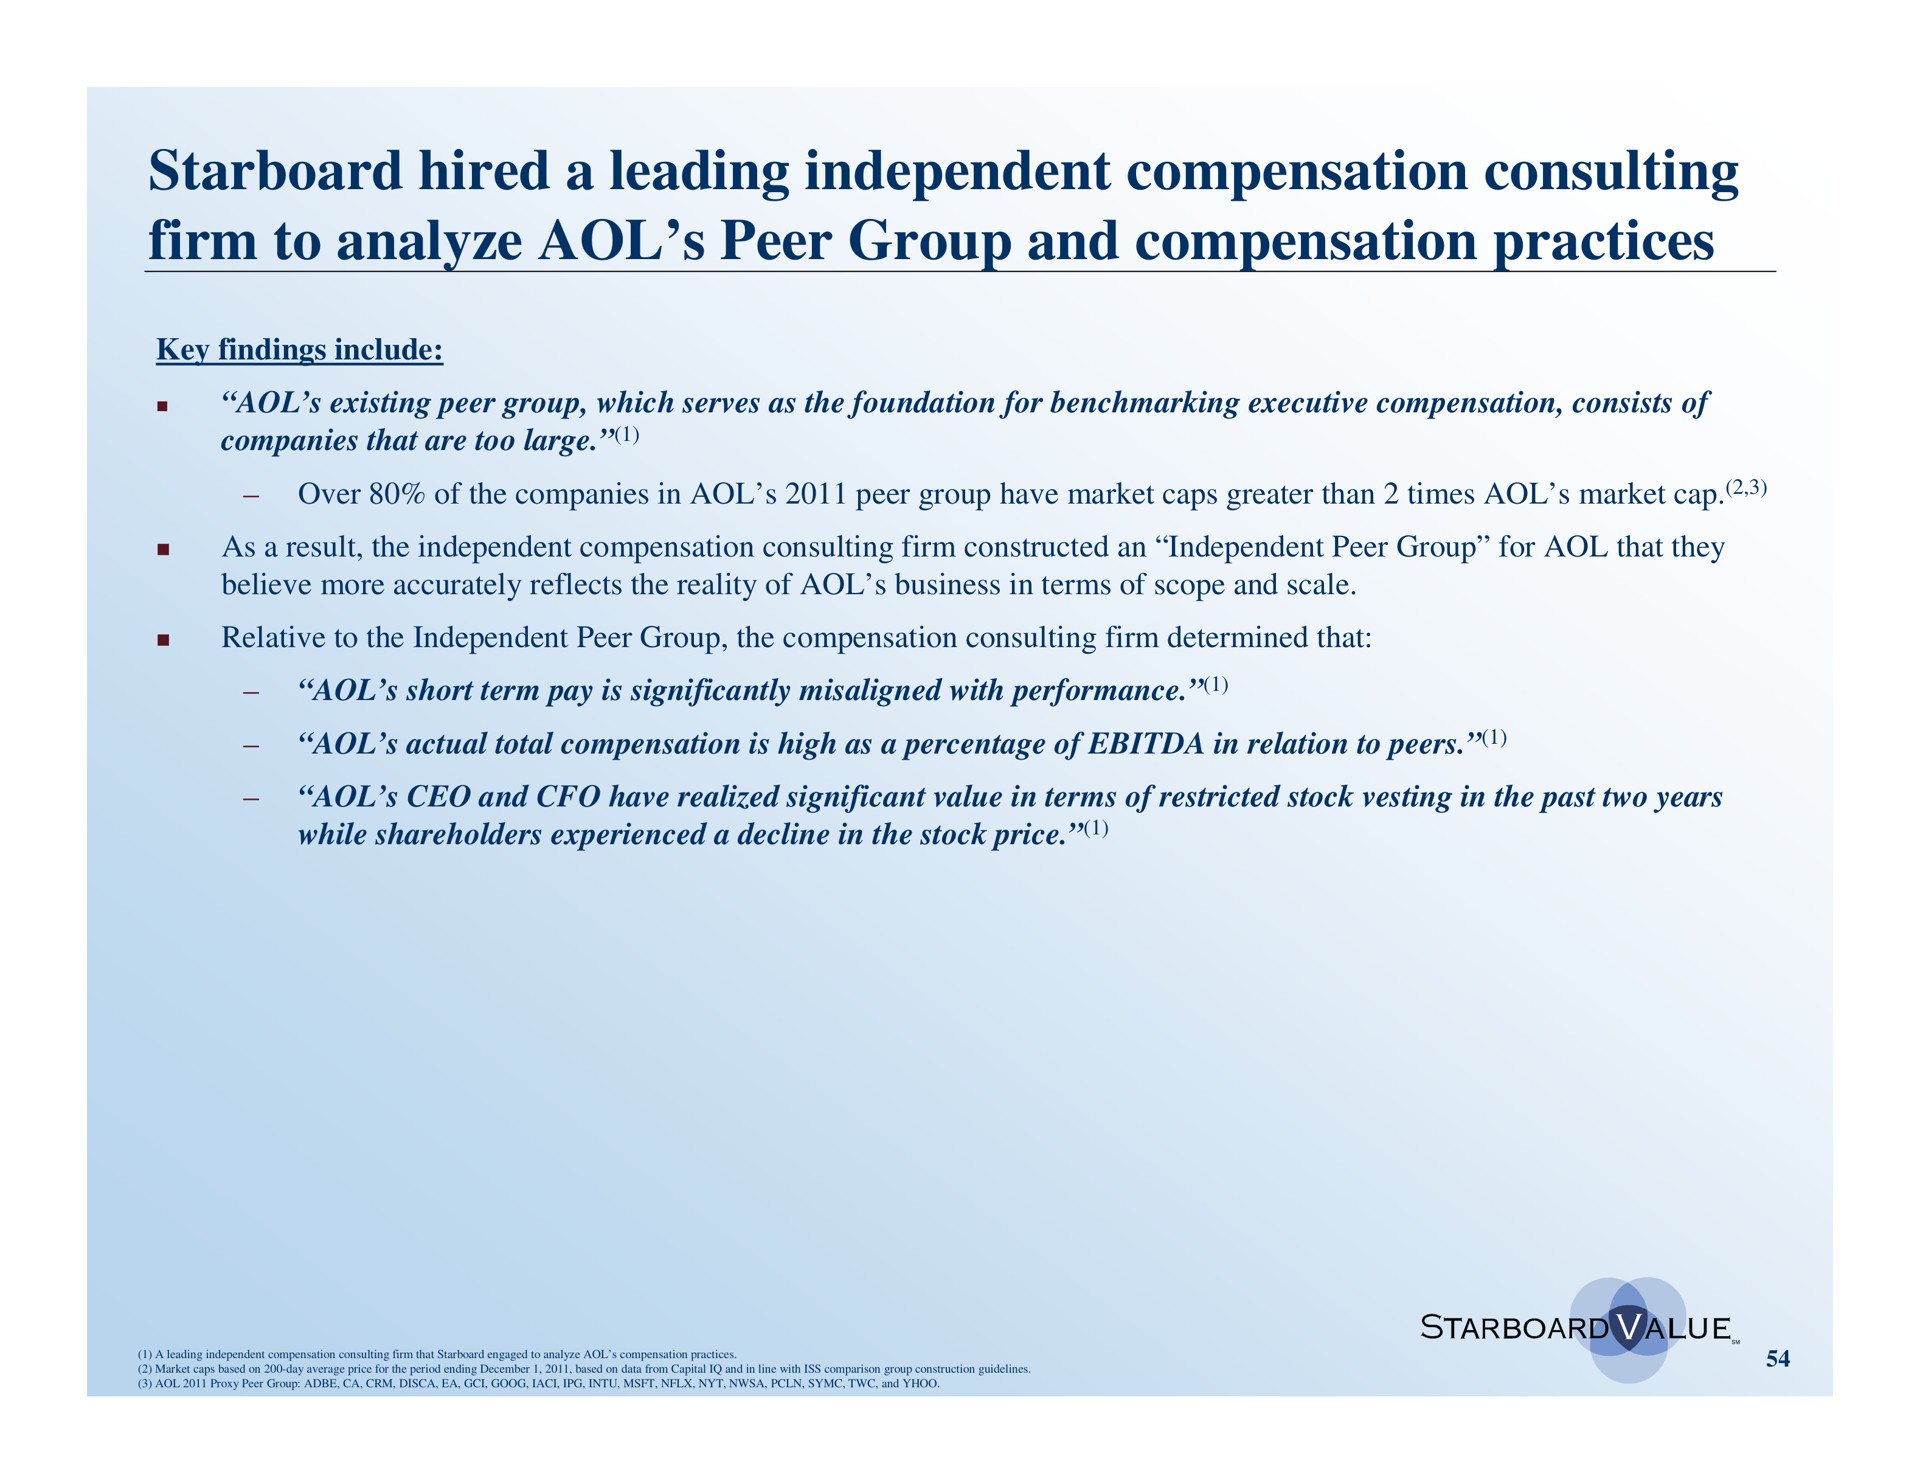 starboard hired a leading independent compensation consulting firm to analyze peer group and compensation practices | Starboard Value